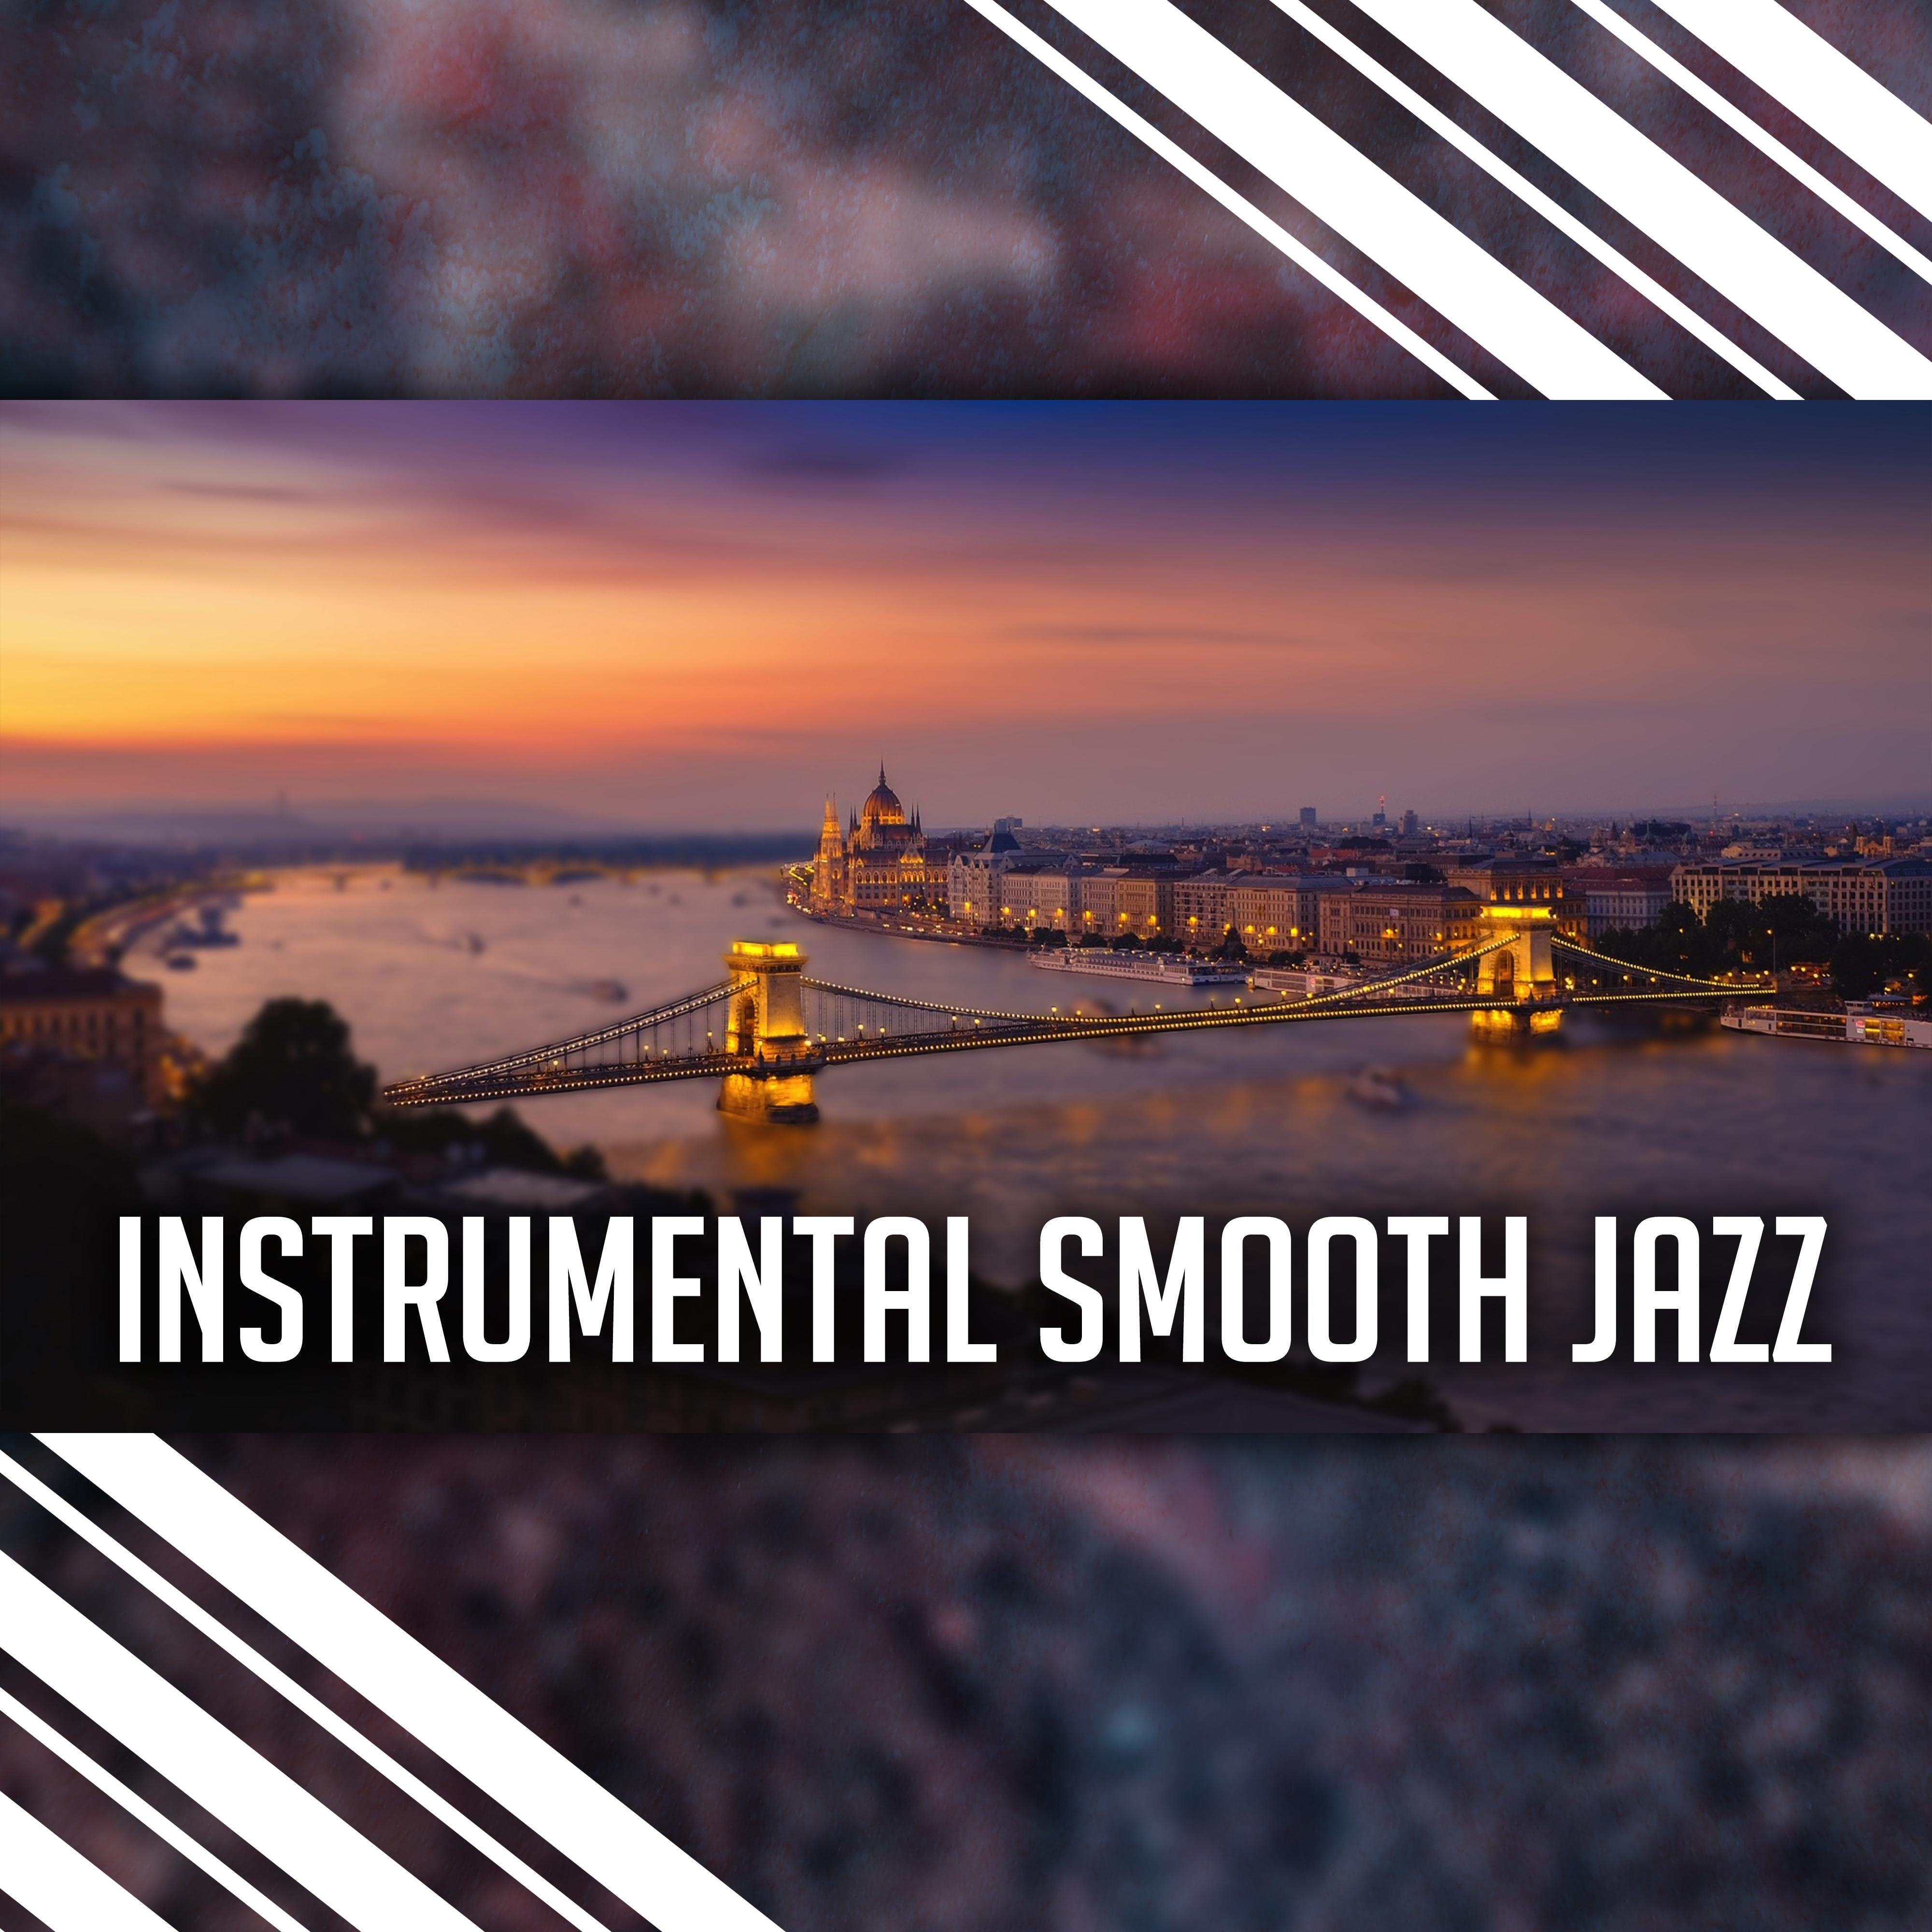 Instrumental Smooth Jazz – Calming Piano Bar, Guitar Relaxation, Soft Music to Rest, Night Jazz Club